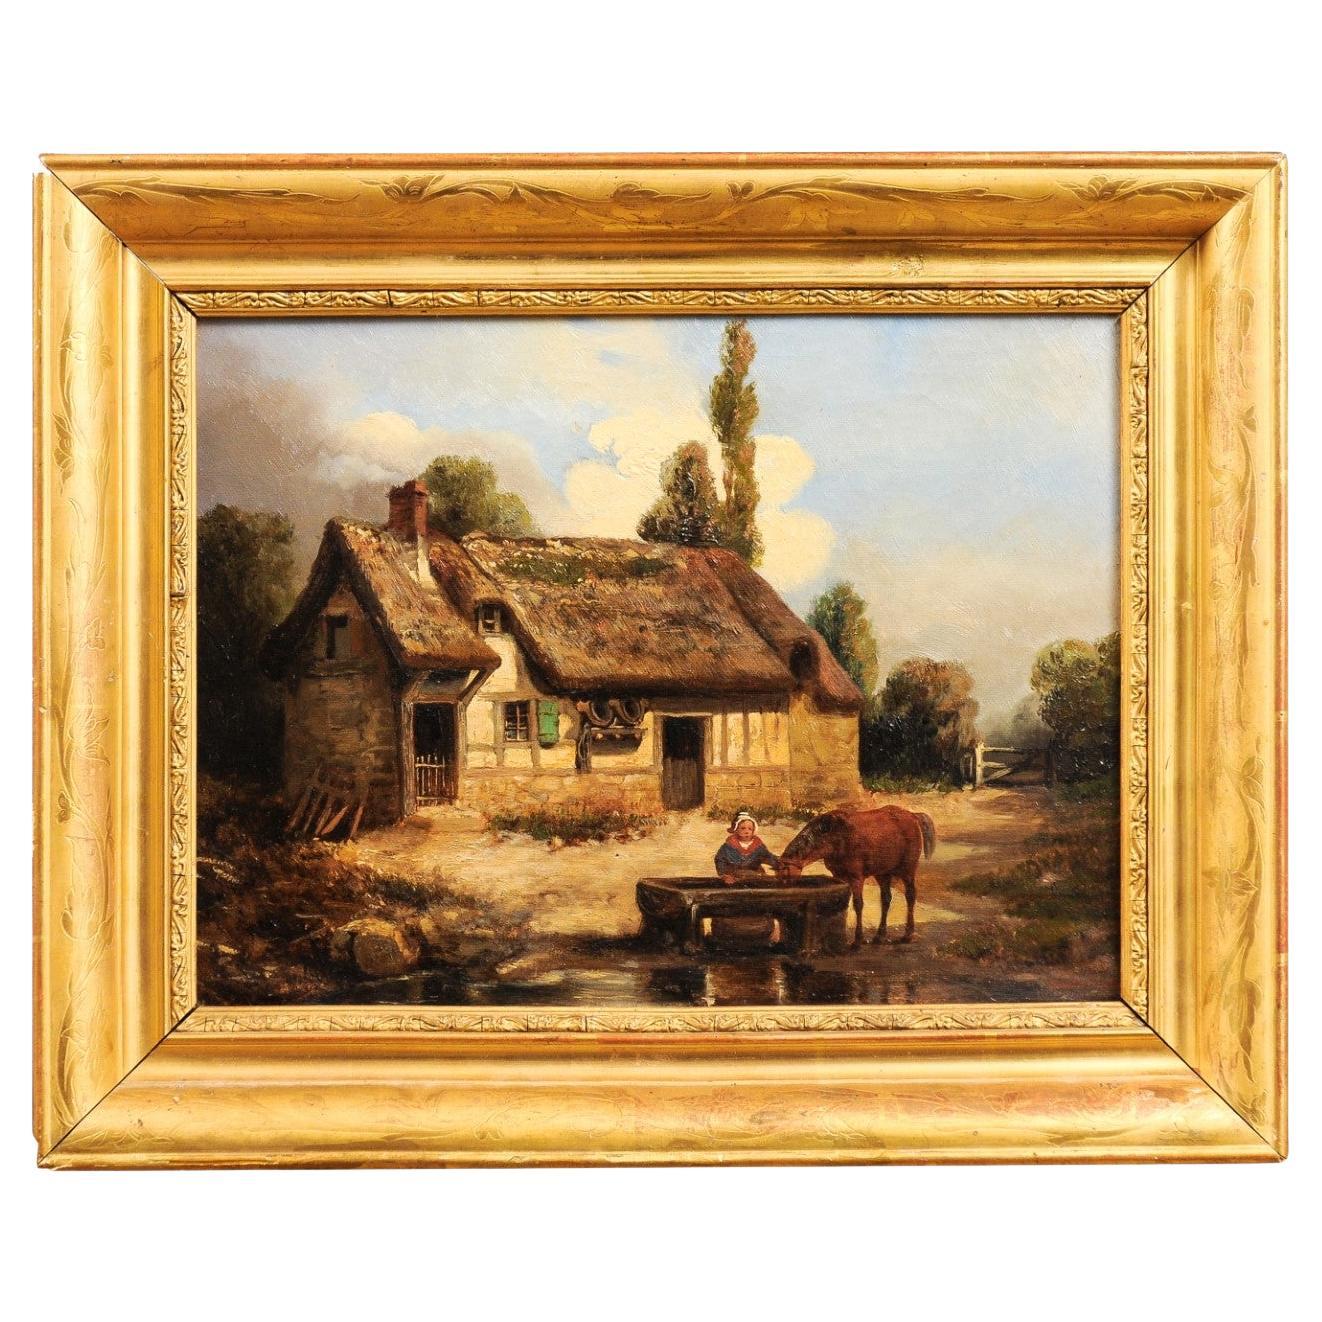 French 19th Century Painting Signed Léon Bertan Depicting a Bucolic Farm Scene